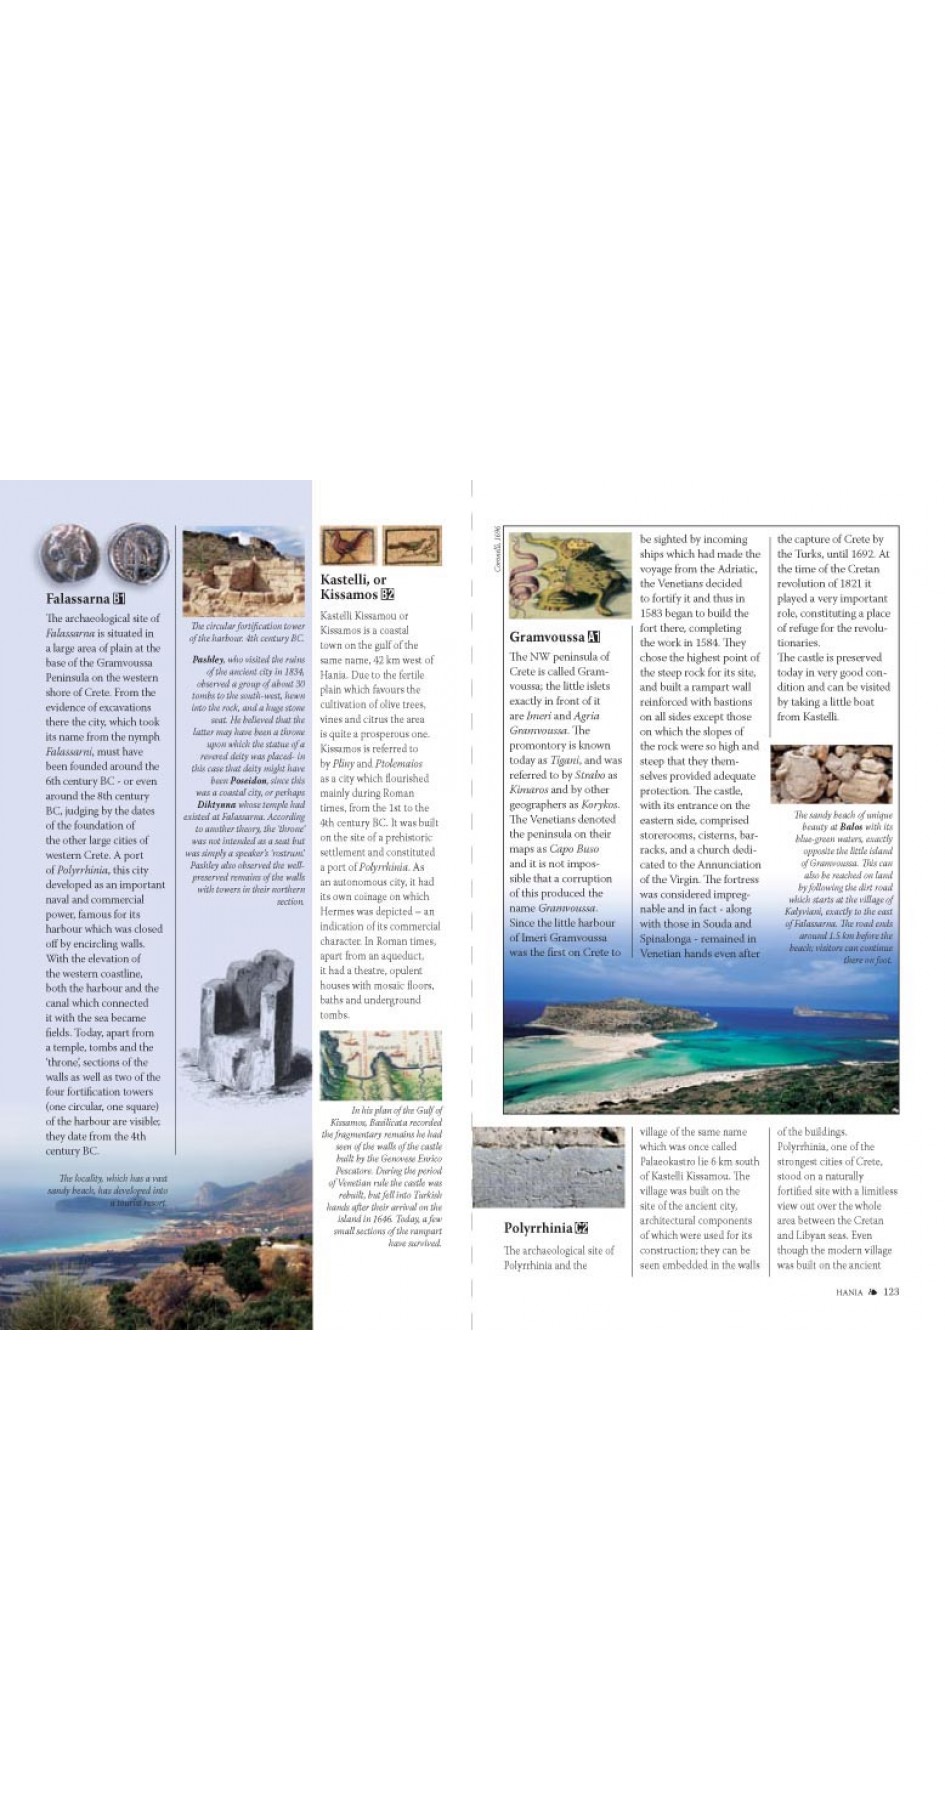 Crete : History - Sightseing - Museums - Nature - Maps (English)